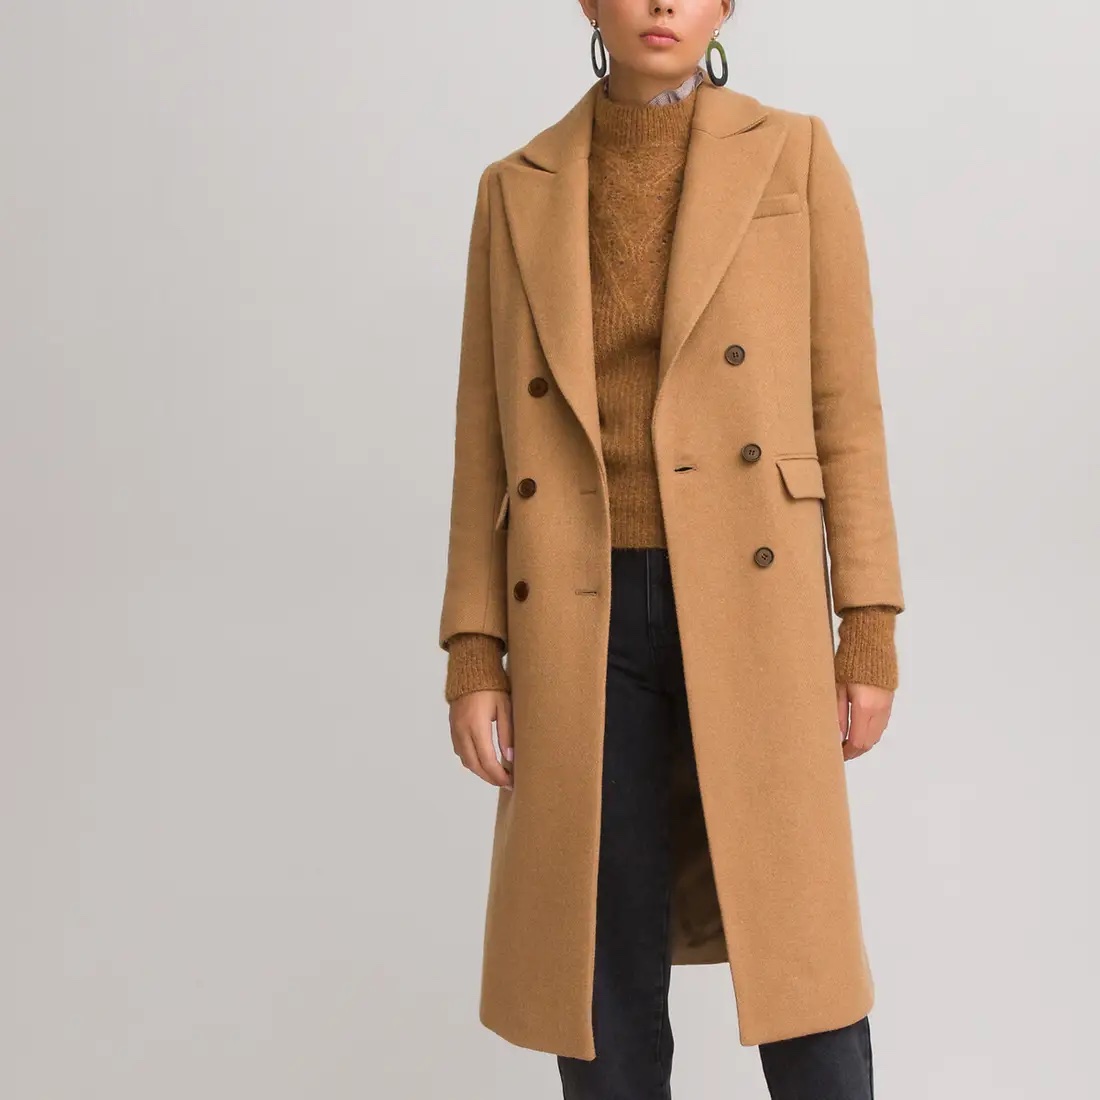 Long overcoat made in Europe